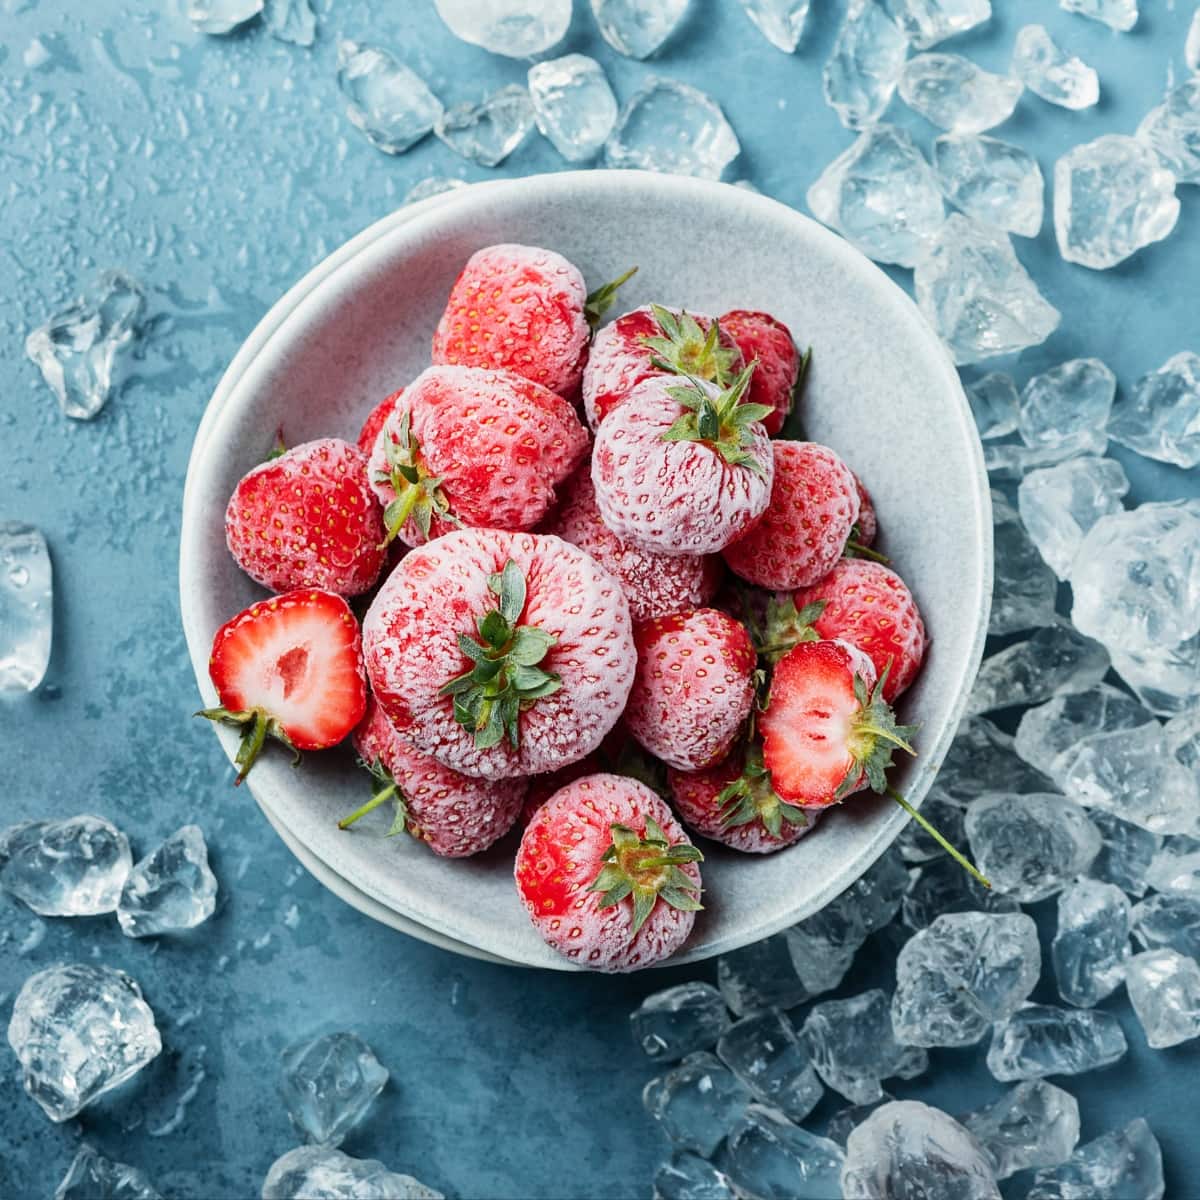 Bowl of  Whole and Sliced Frozen Strawberries on a Table, Surrounded By Chunks of Ice